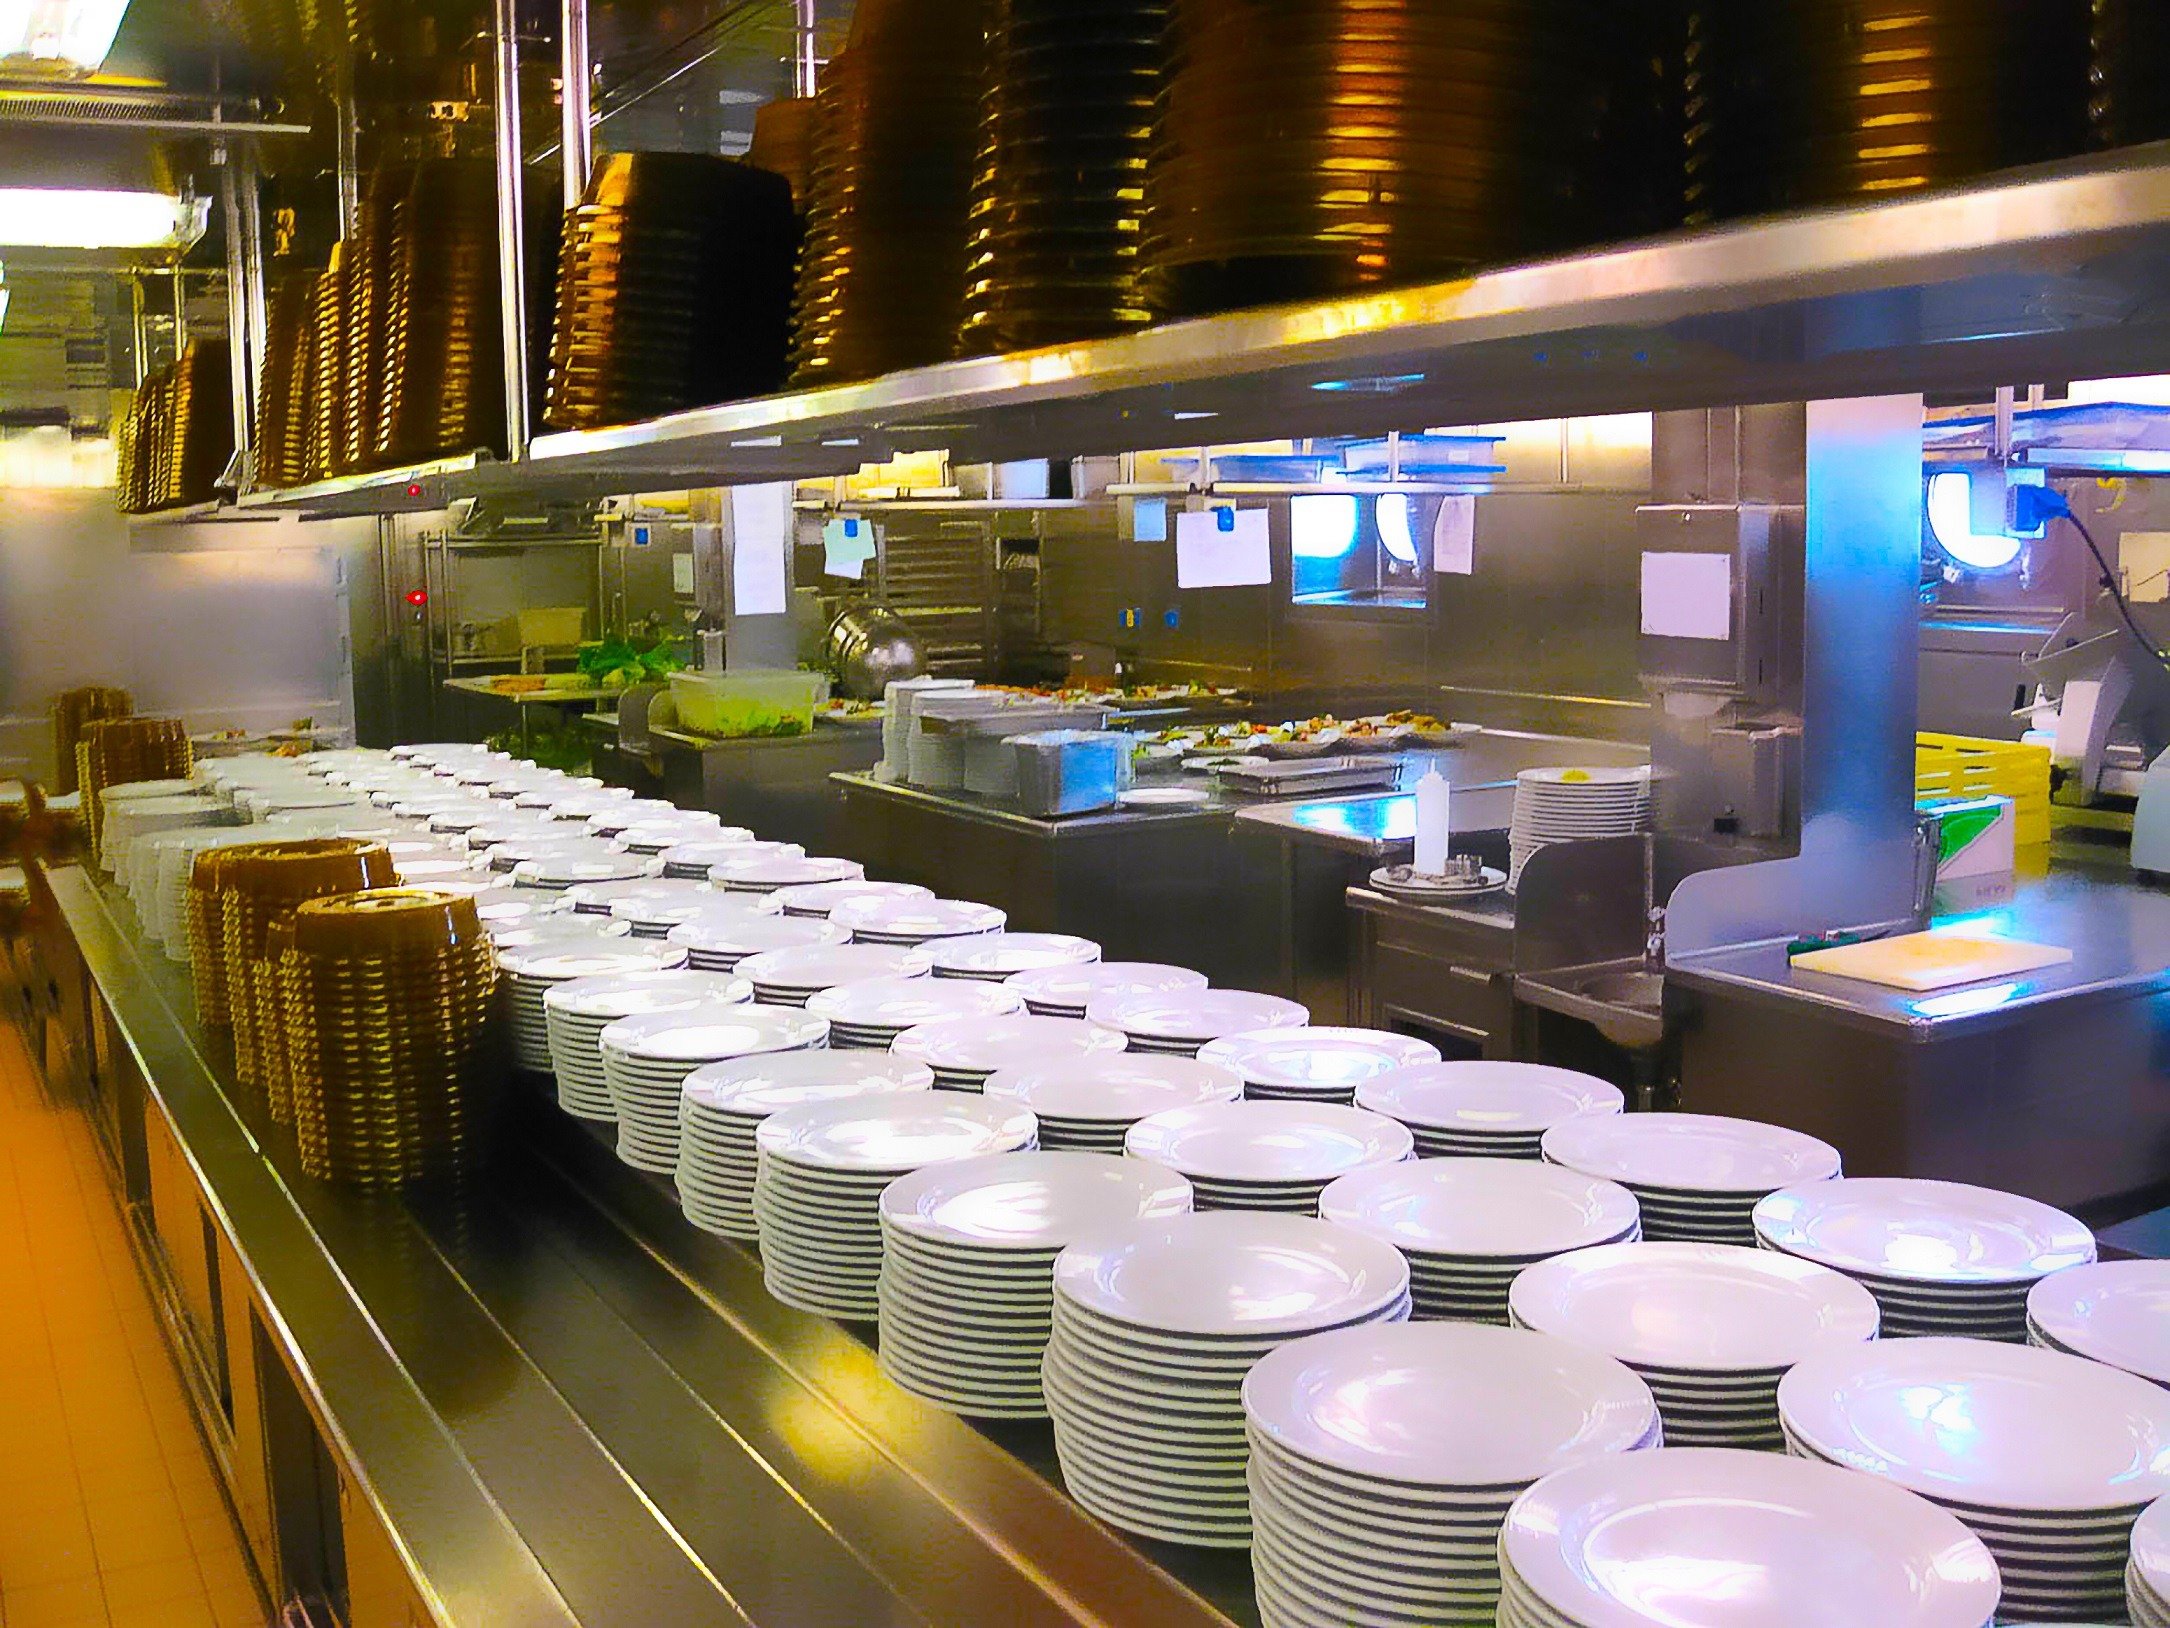 Kitchen of a cruise ship